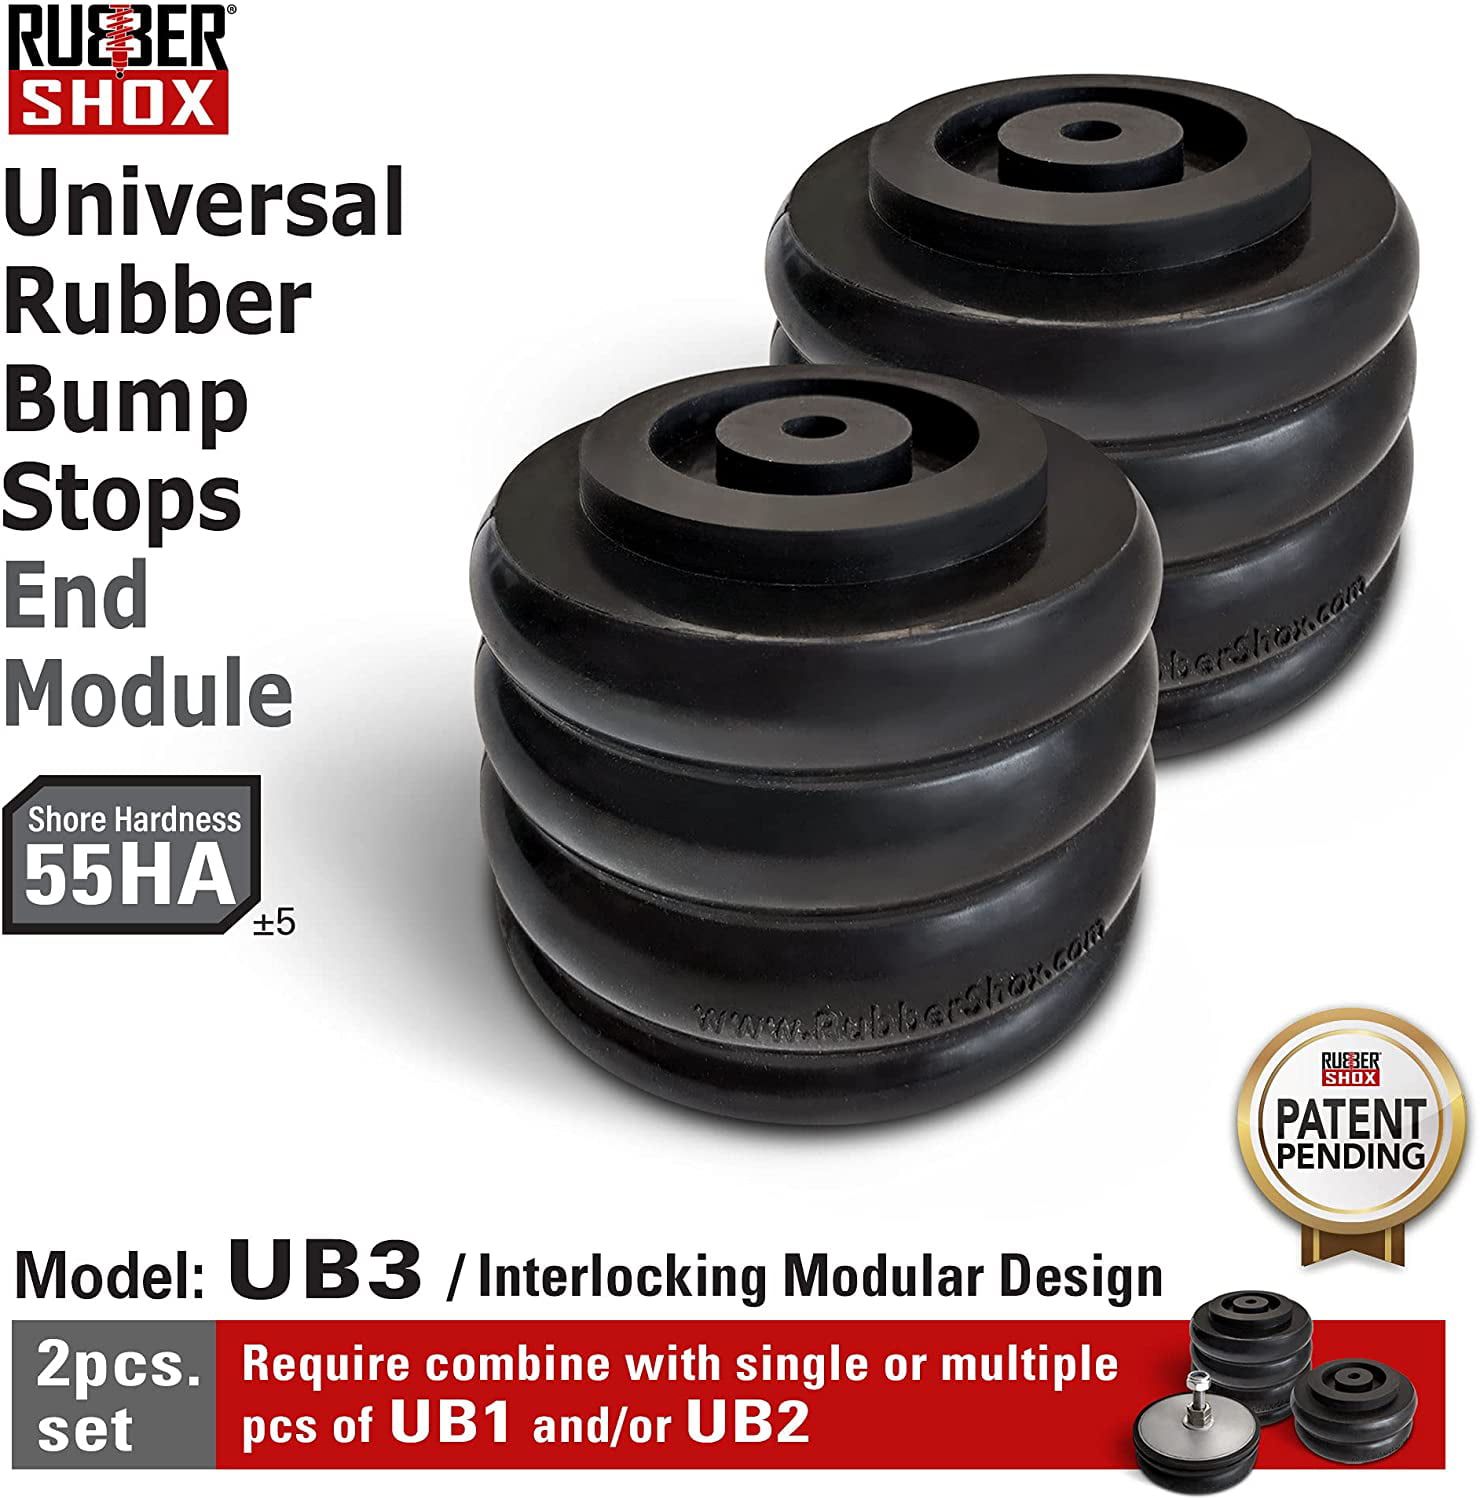 RubberShox Modular Universal Rubber Bump Stop for Truck and RV Suspension  Enhancement, UB3 Sub-Module, 5000 lbs/Pair, Hardness 55HA, Require UB1 Top  Module